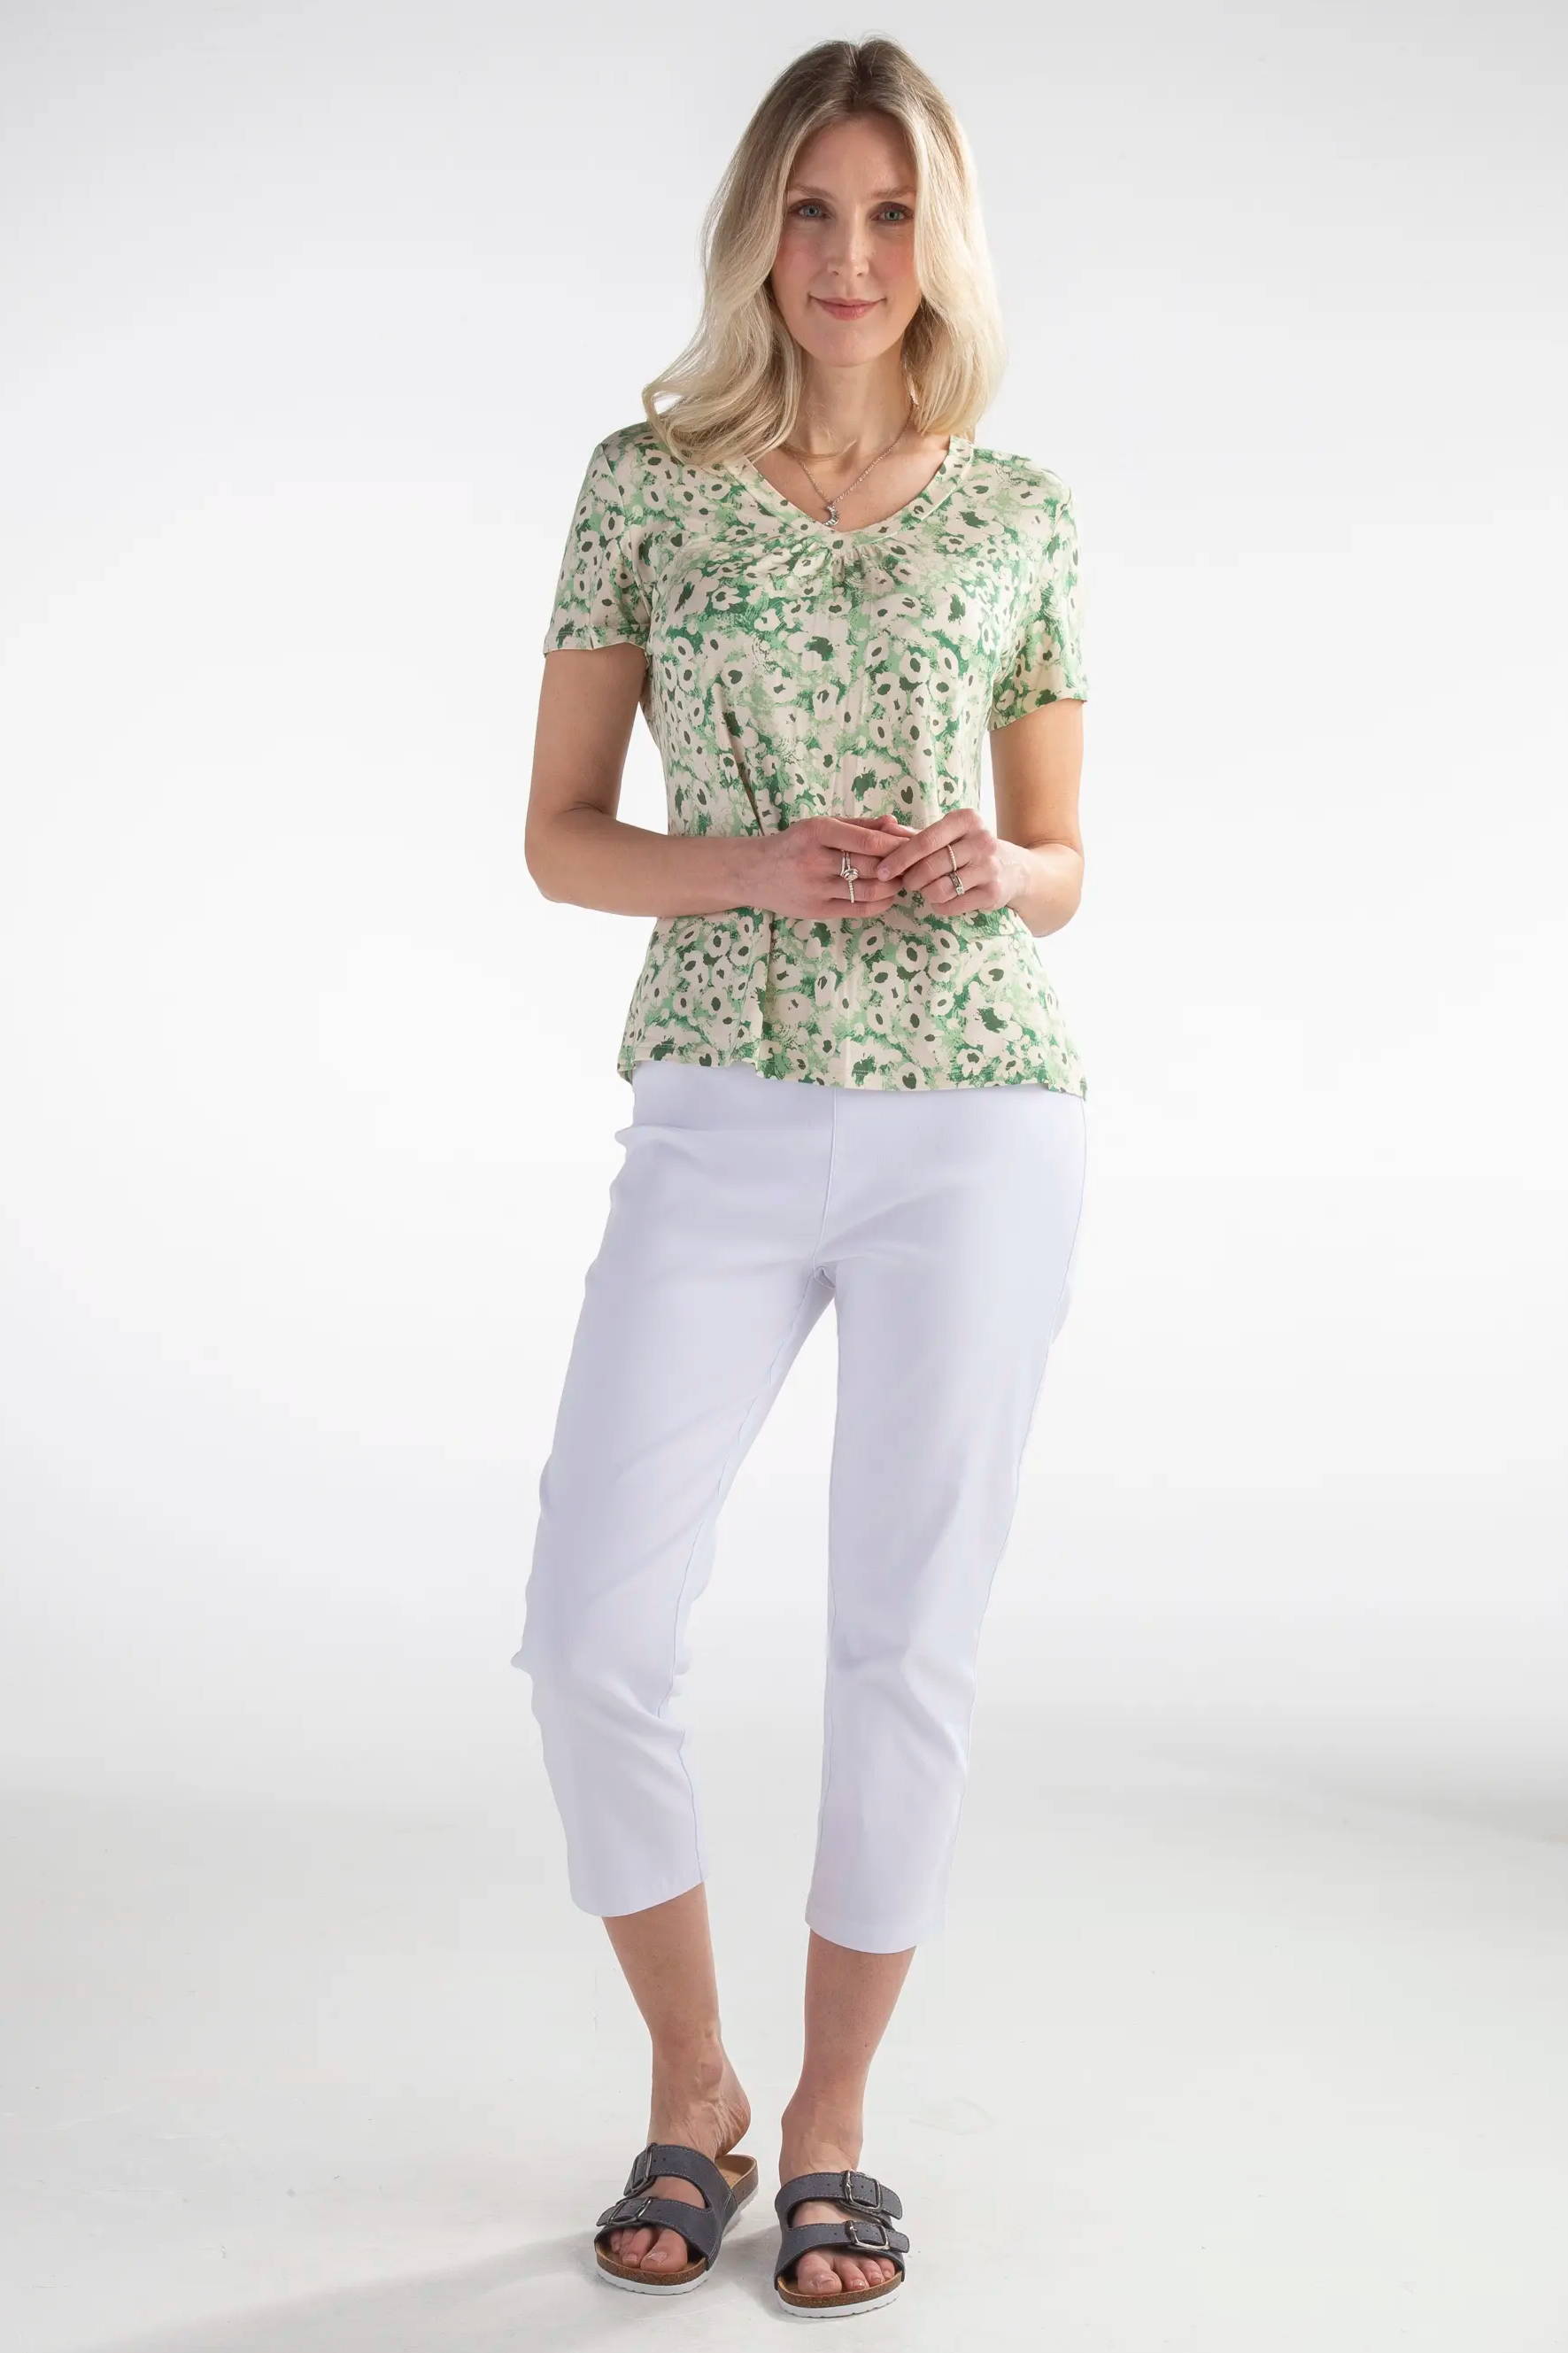 Classic women's top & cropped trousers